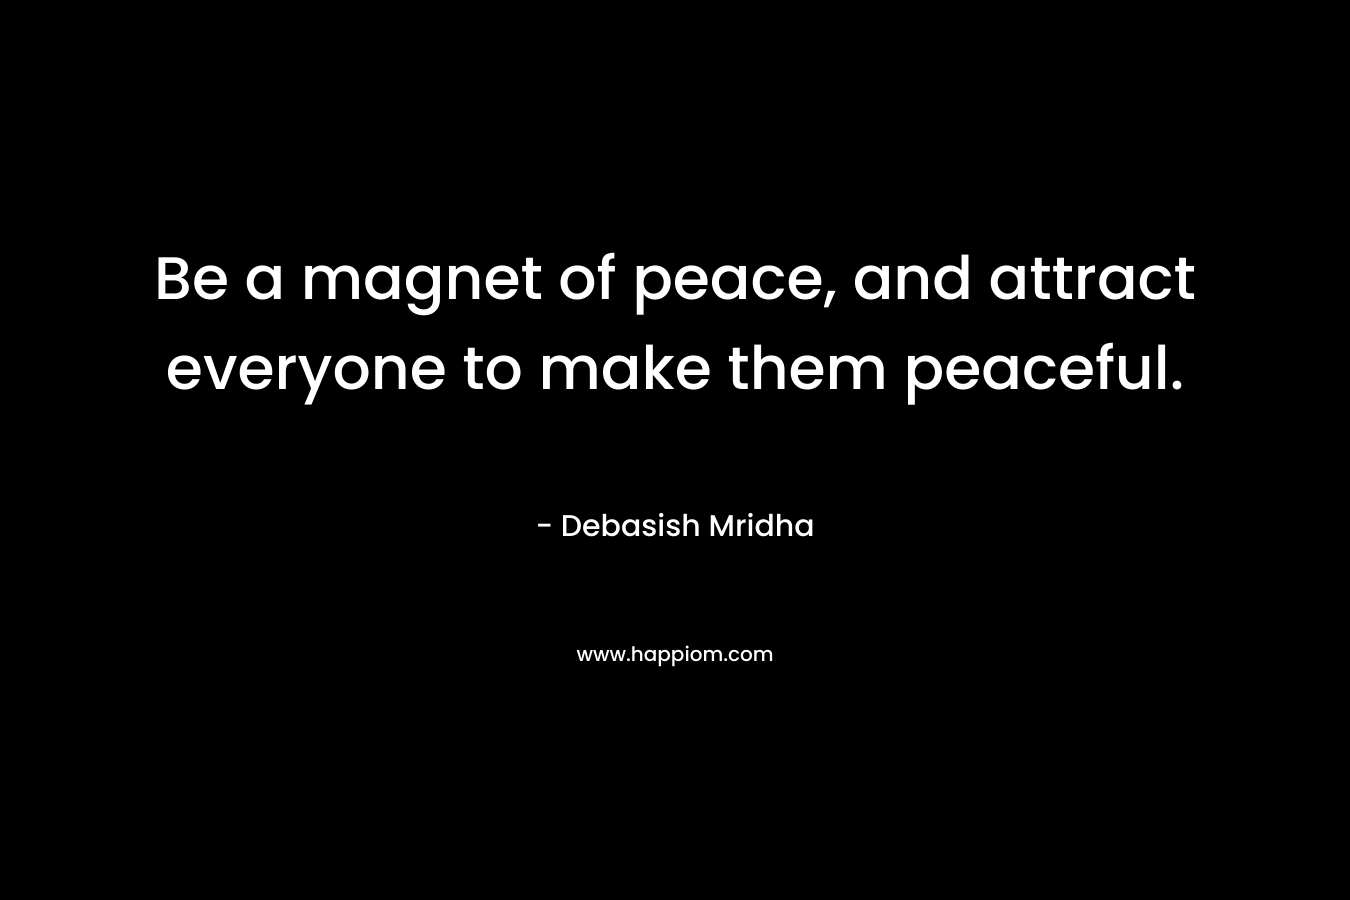 Be a magnet of peace, and attract everyone to make them peaceful.